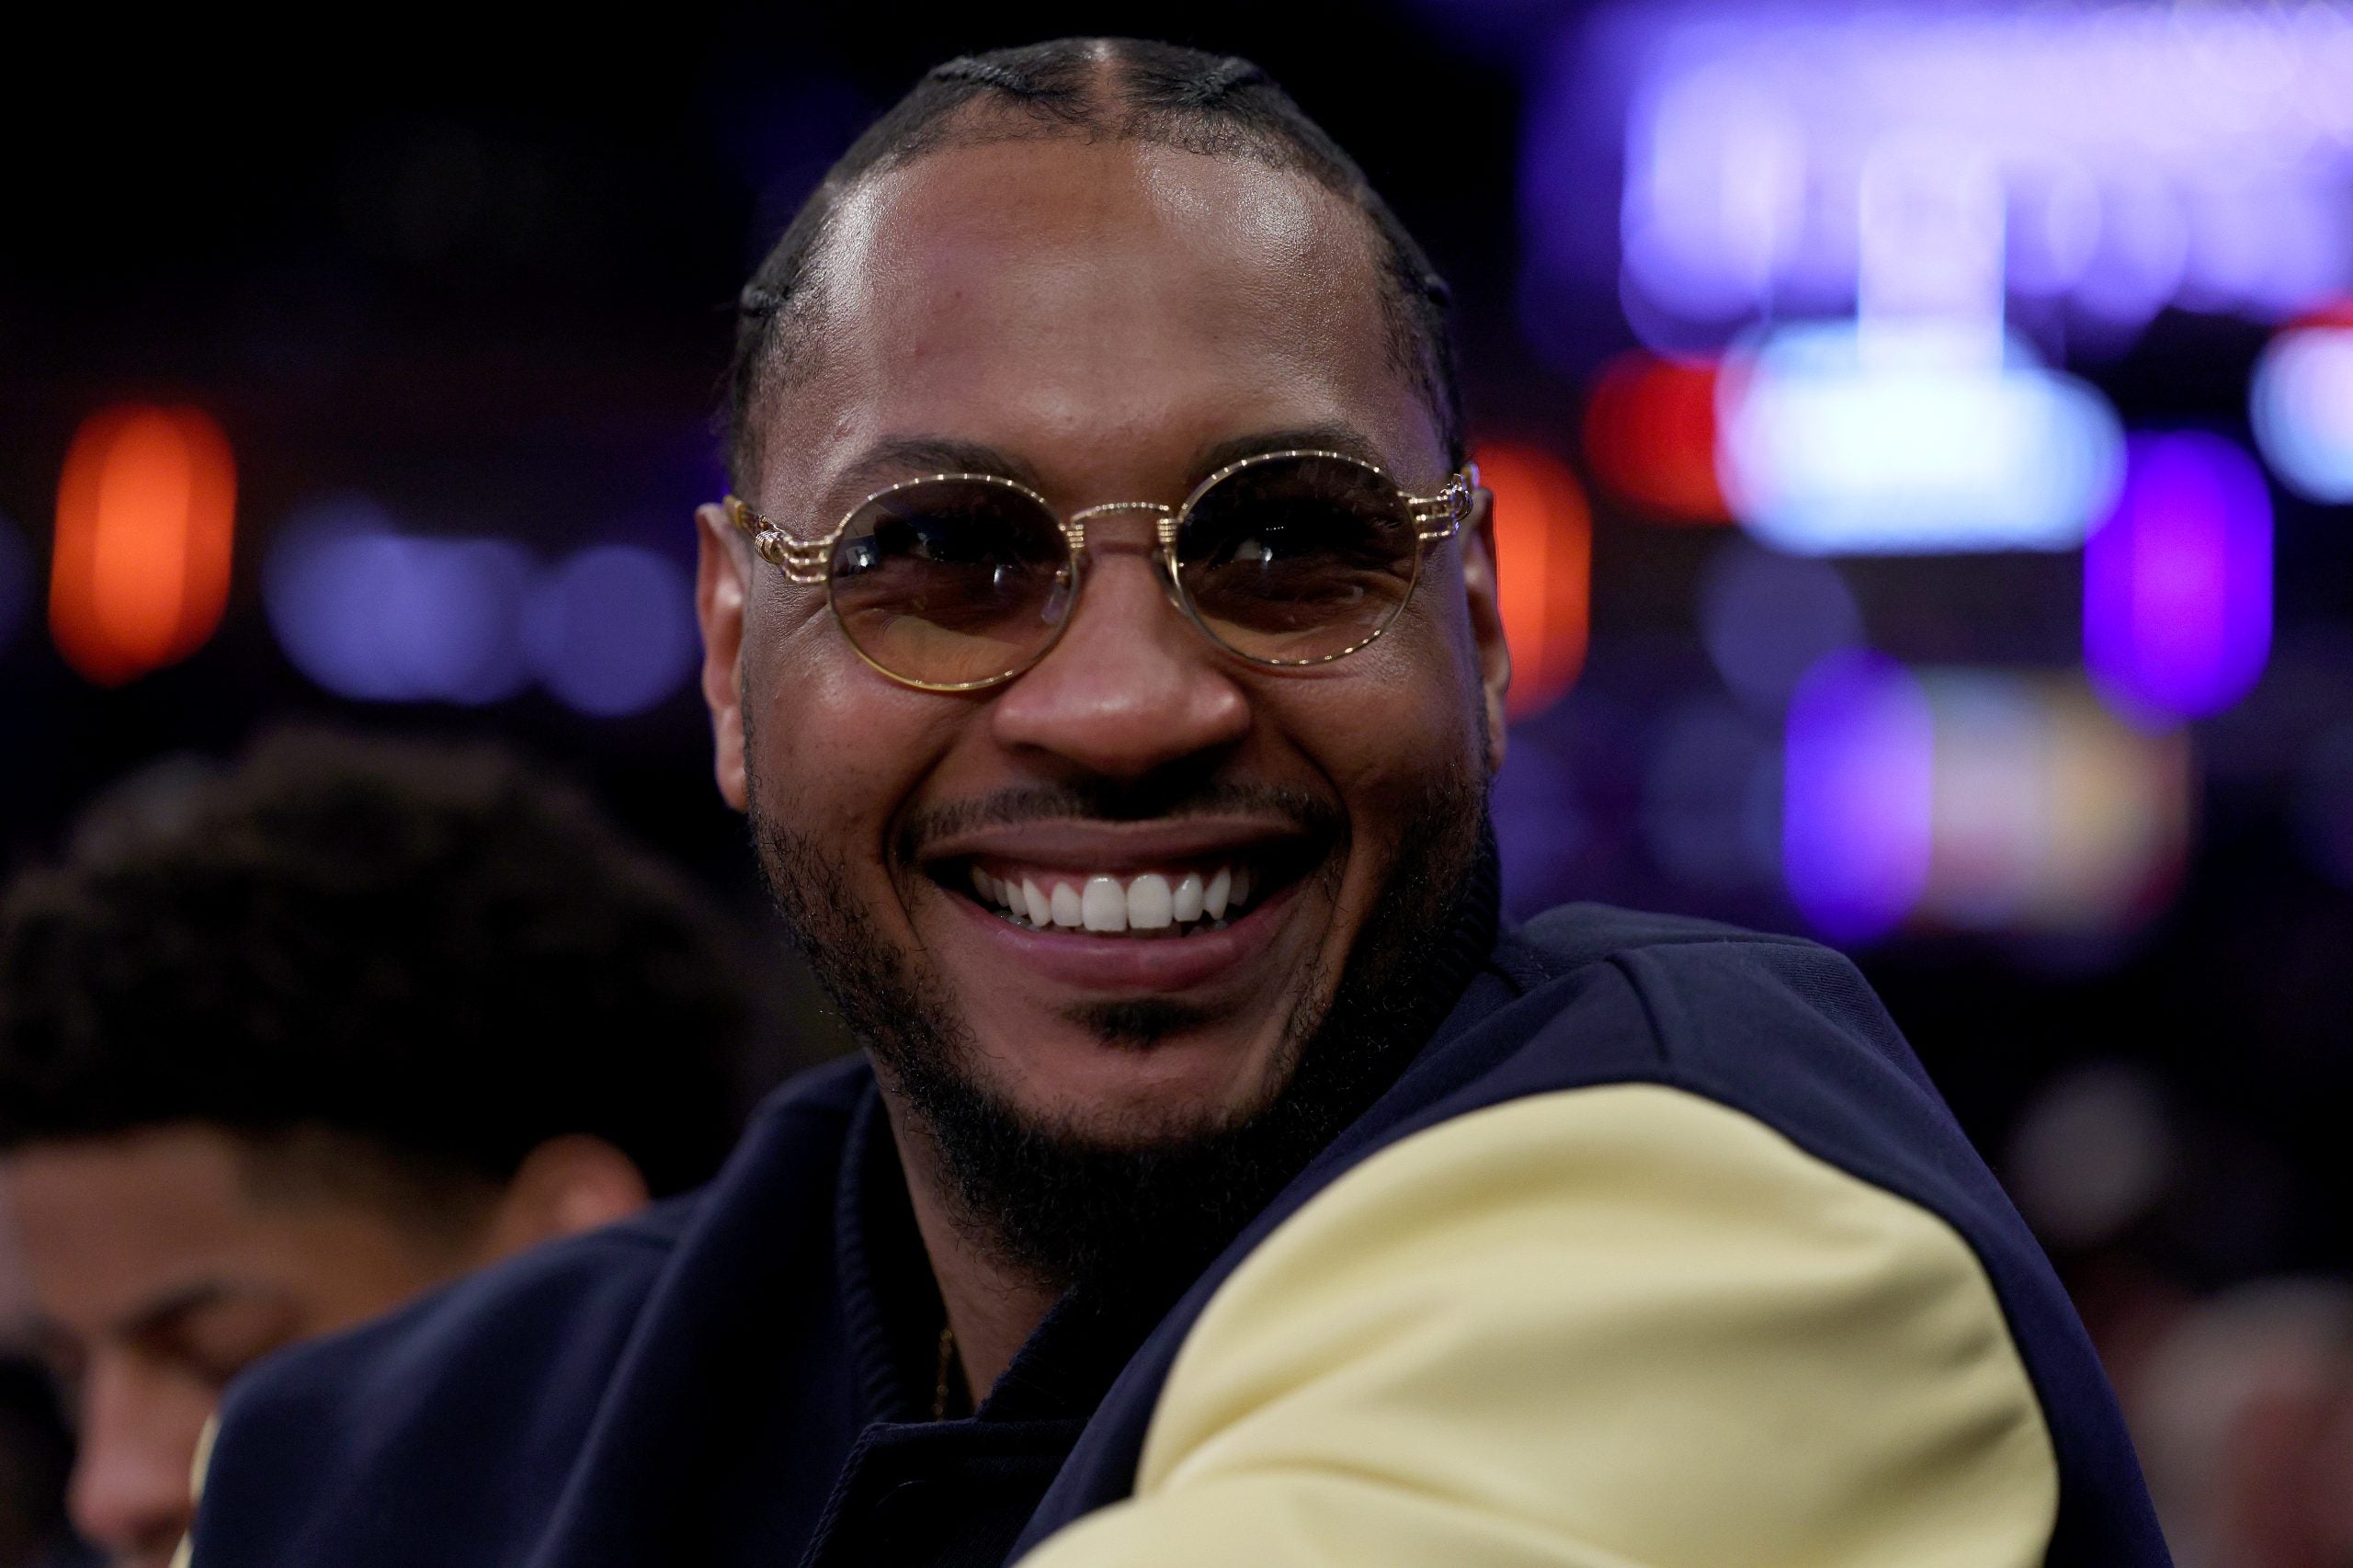 Carmelo Anthony Announces Retirement From The NBA To Focus On Expanding Business Empire